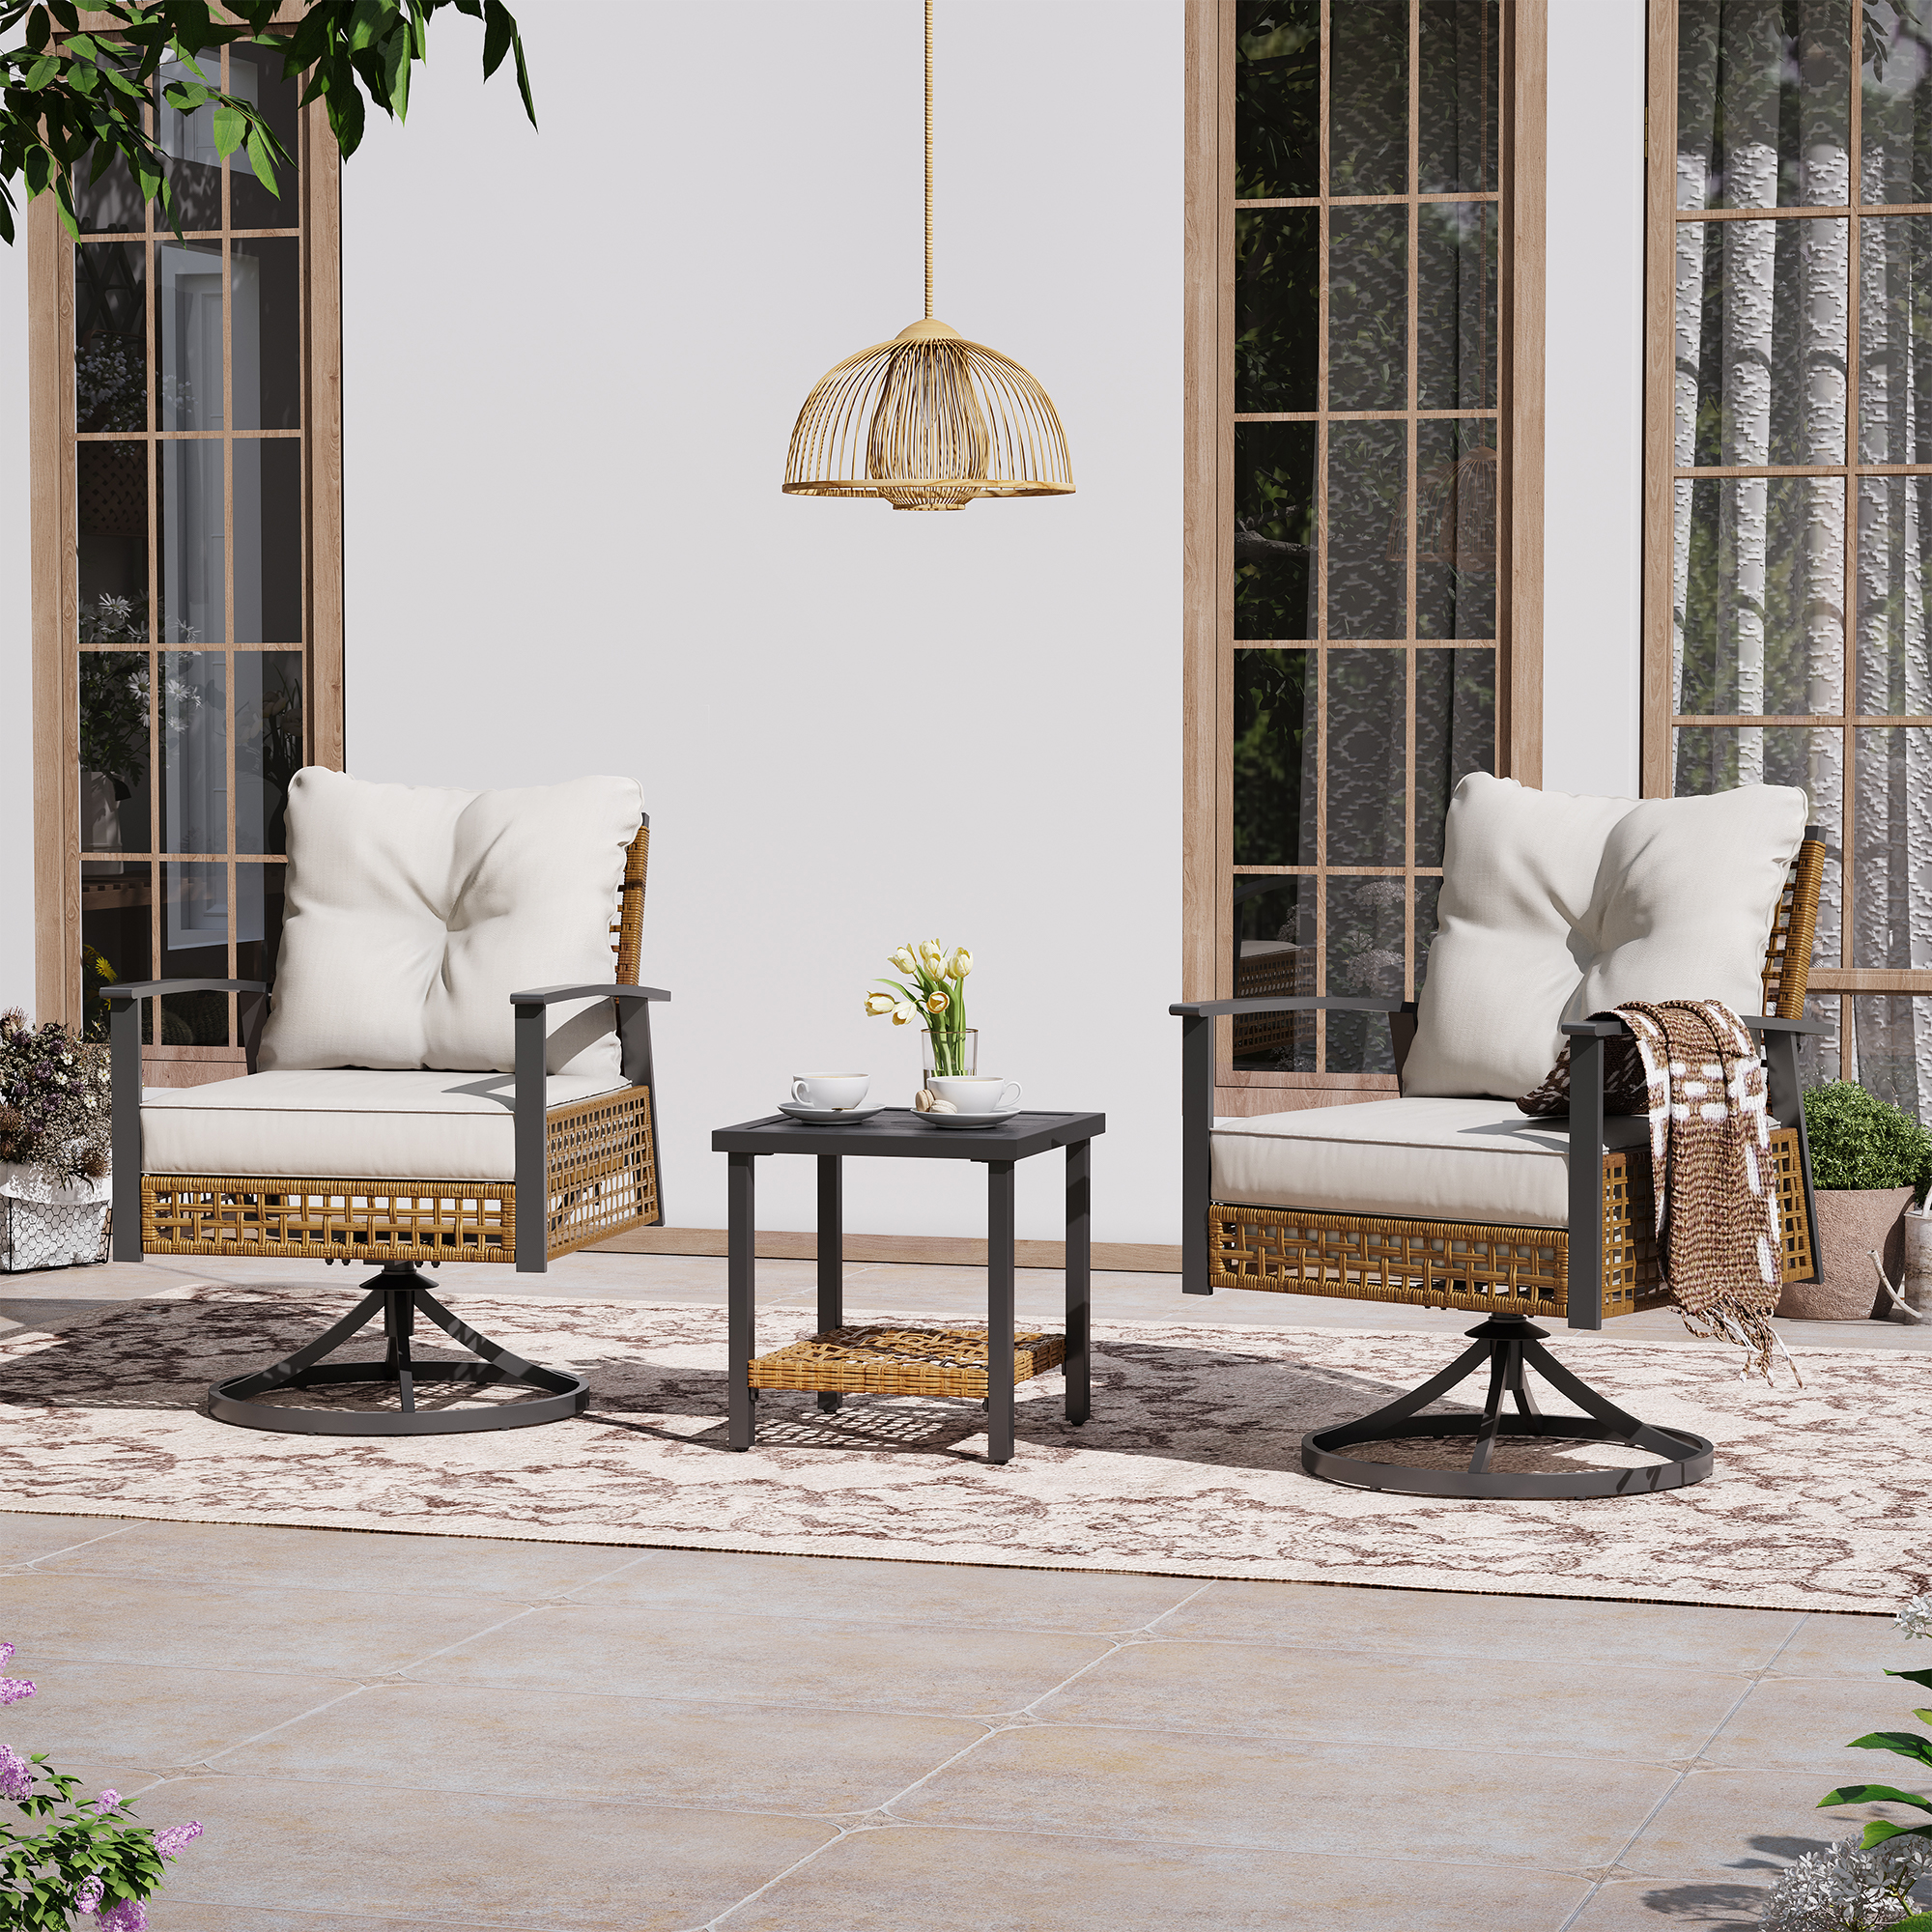 LAUSAINT HOME 3 PCS Patio Conversation Set, Outdoor Swivel Set with PE Rattan Swivel Rocking Chairs & Coffee Table, Beige - image 1 of 9